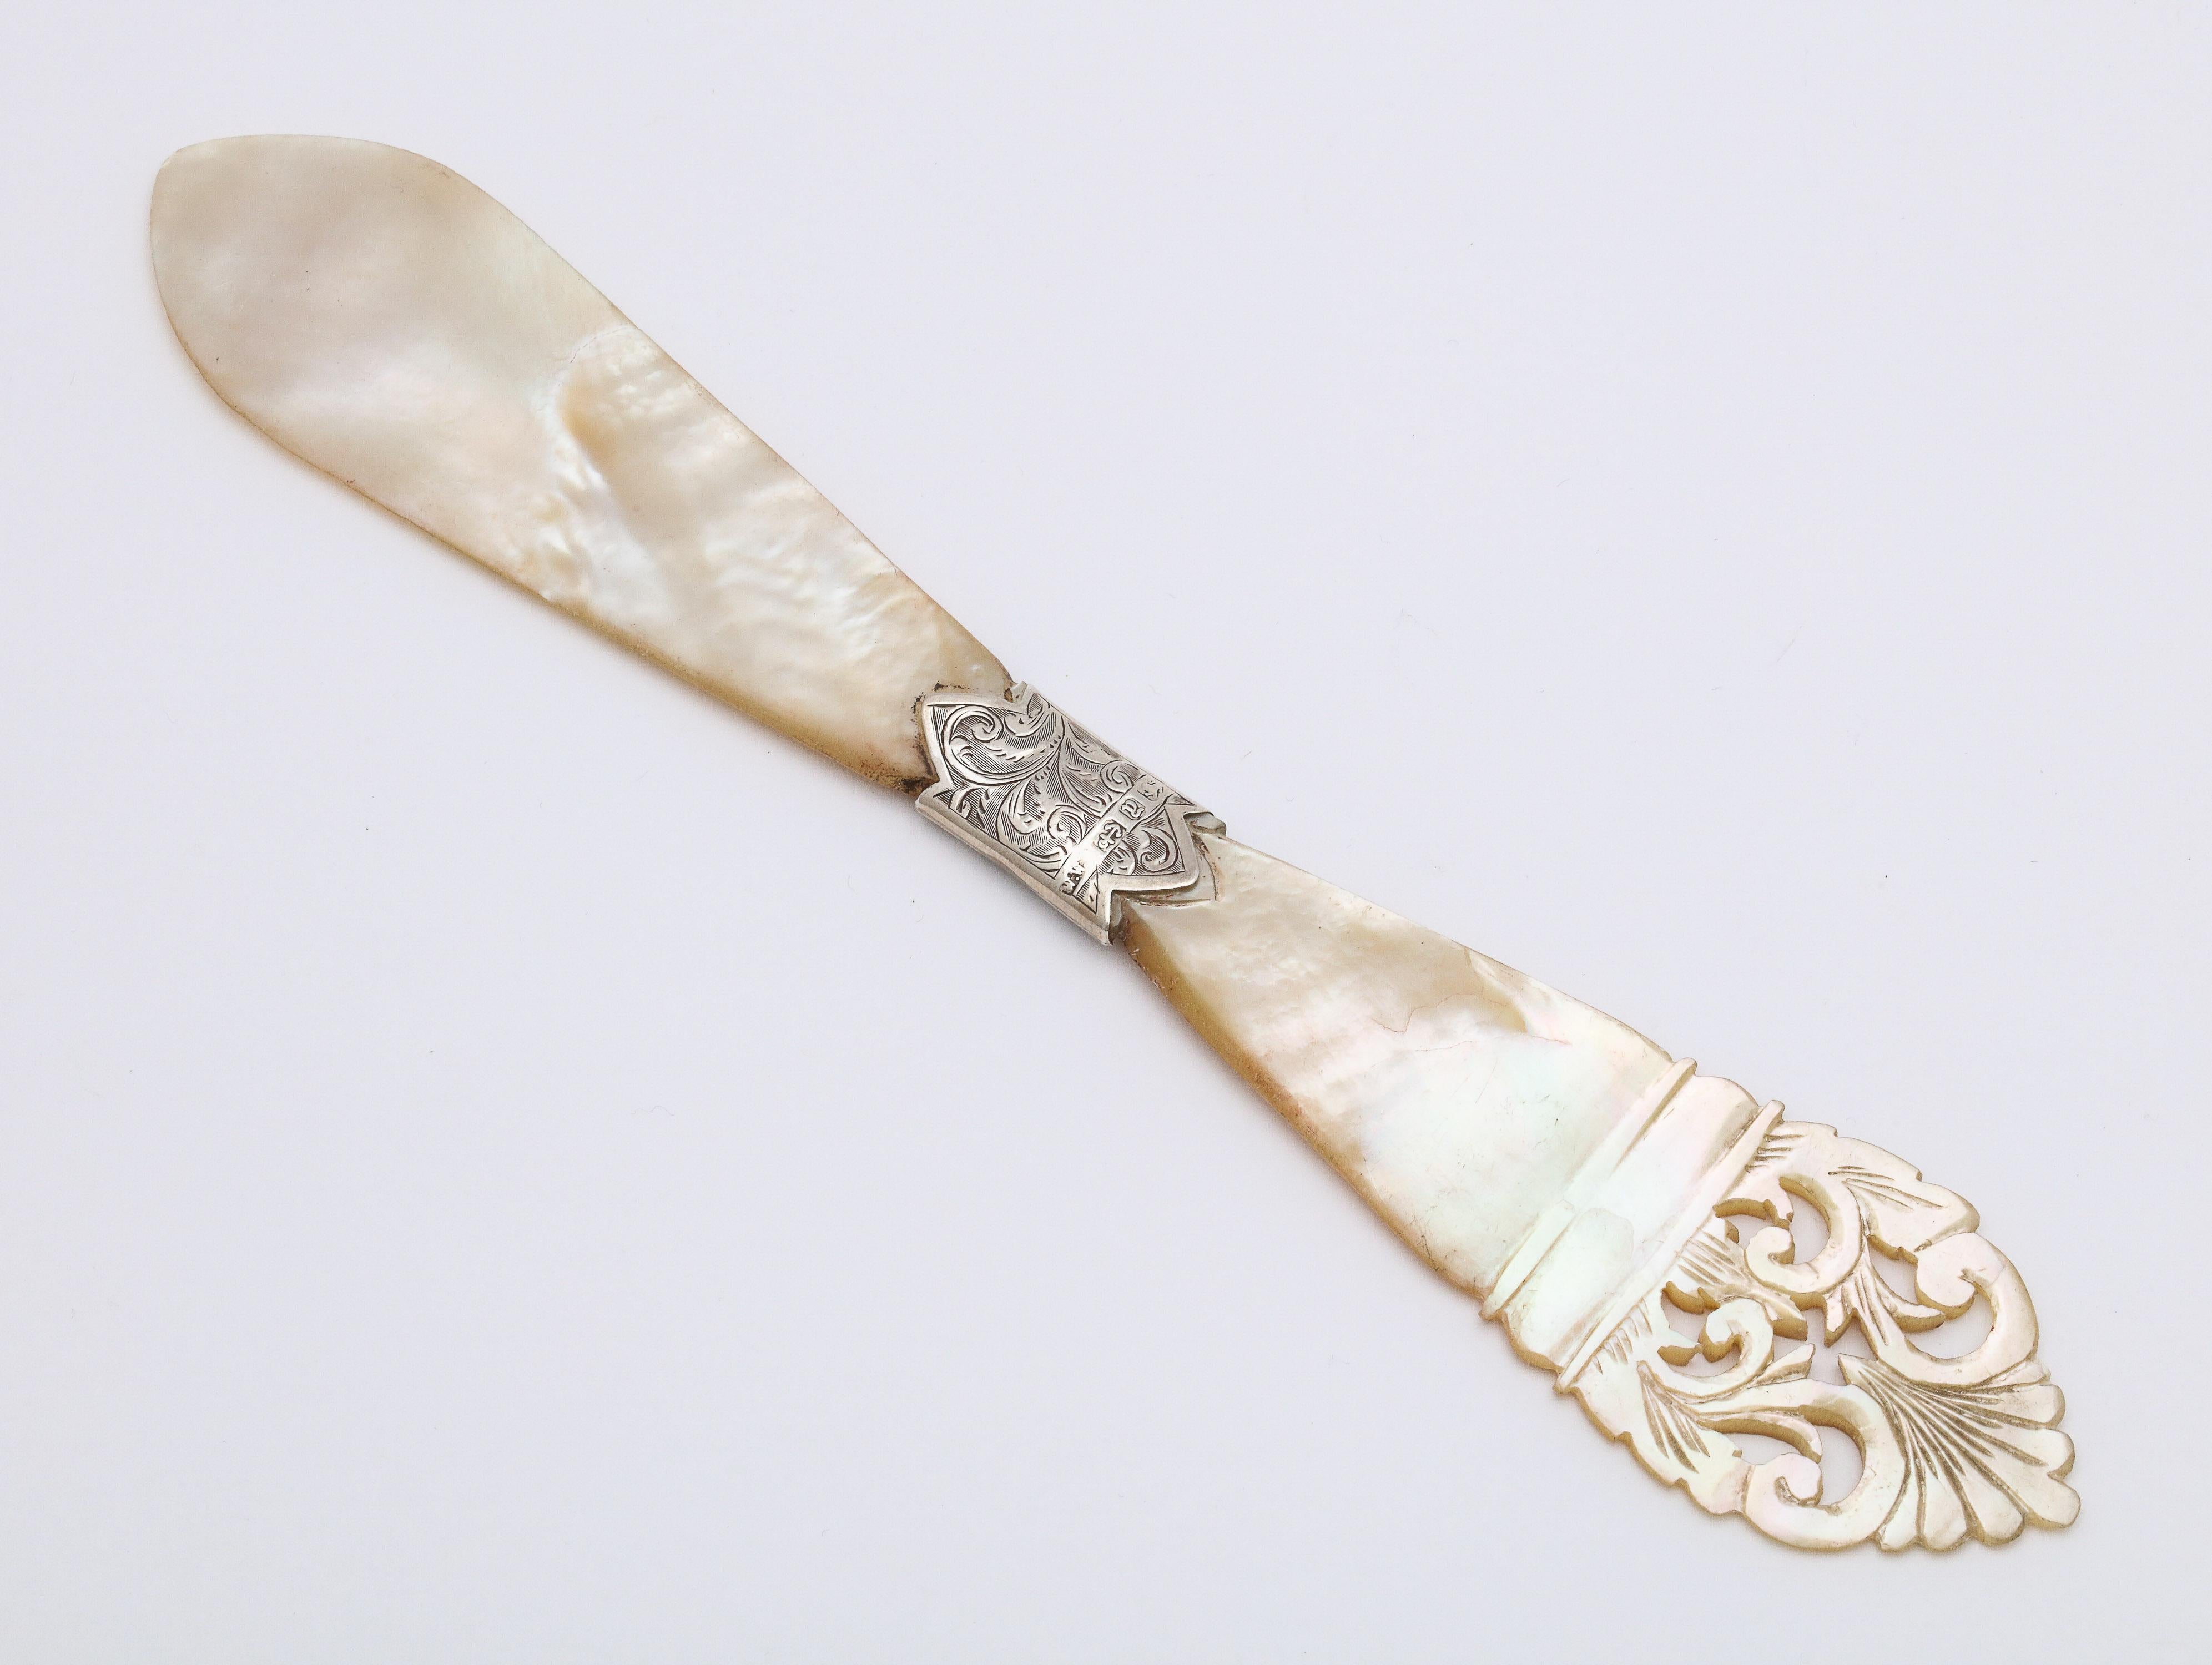 Etched Victorian Sterling Silver-Mounted Mother of Pearl Letter Opener/Paper Knife